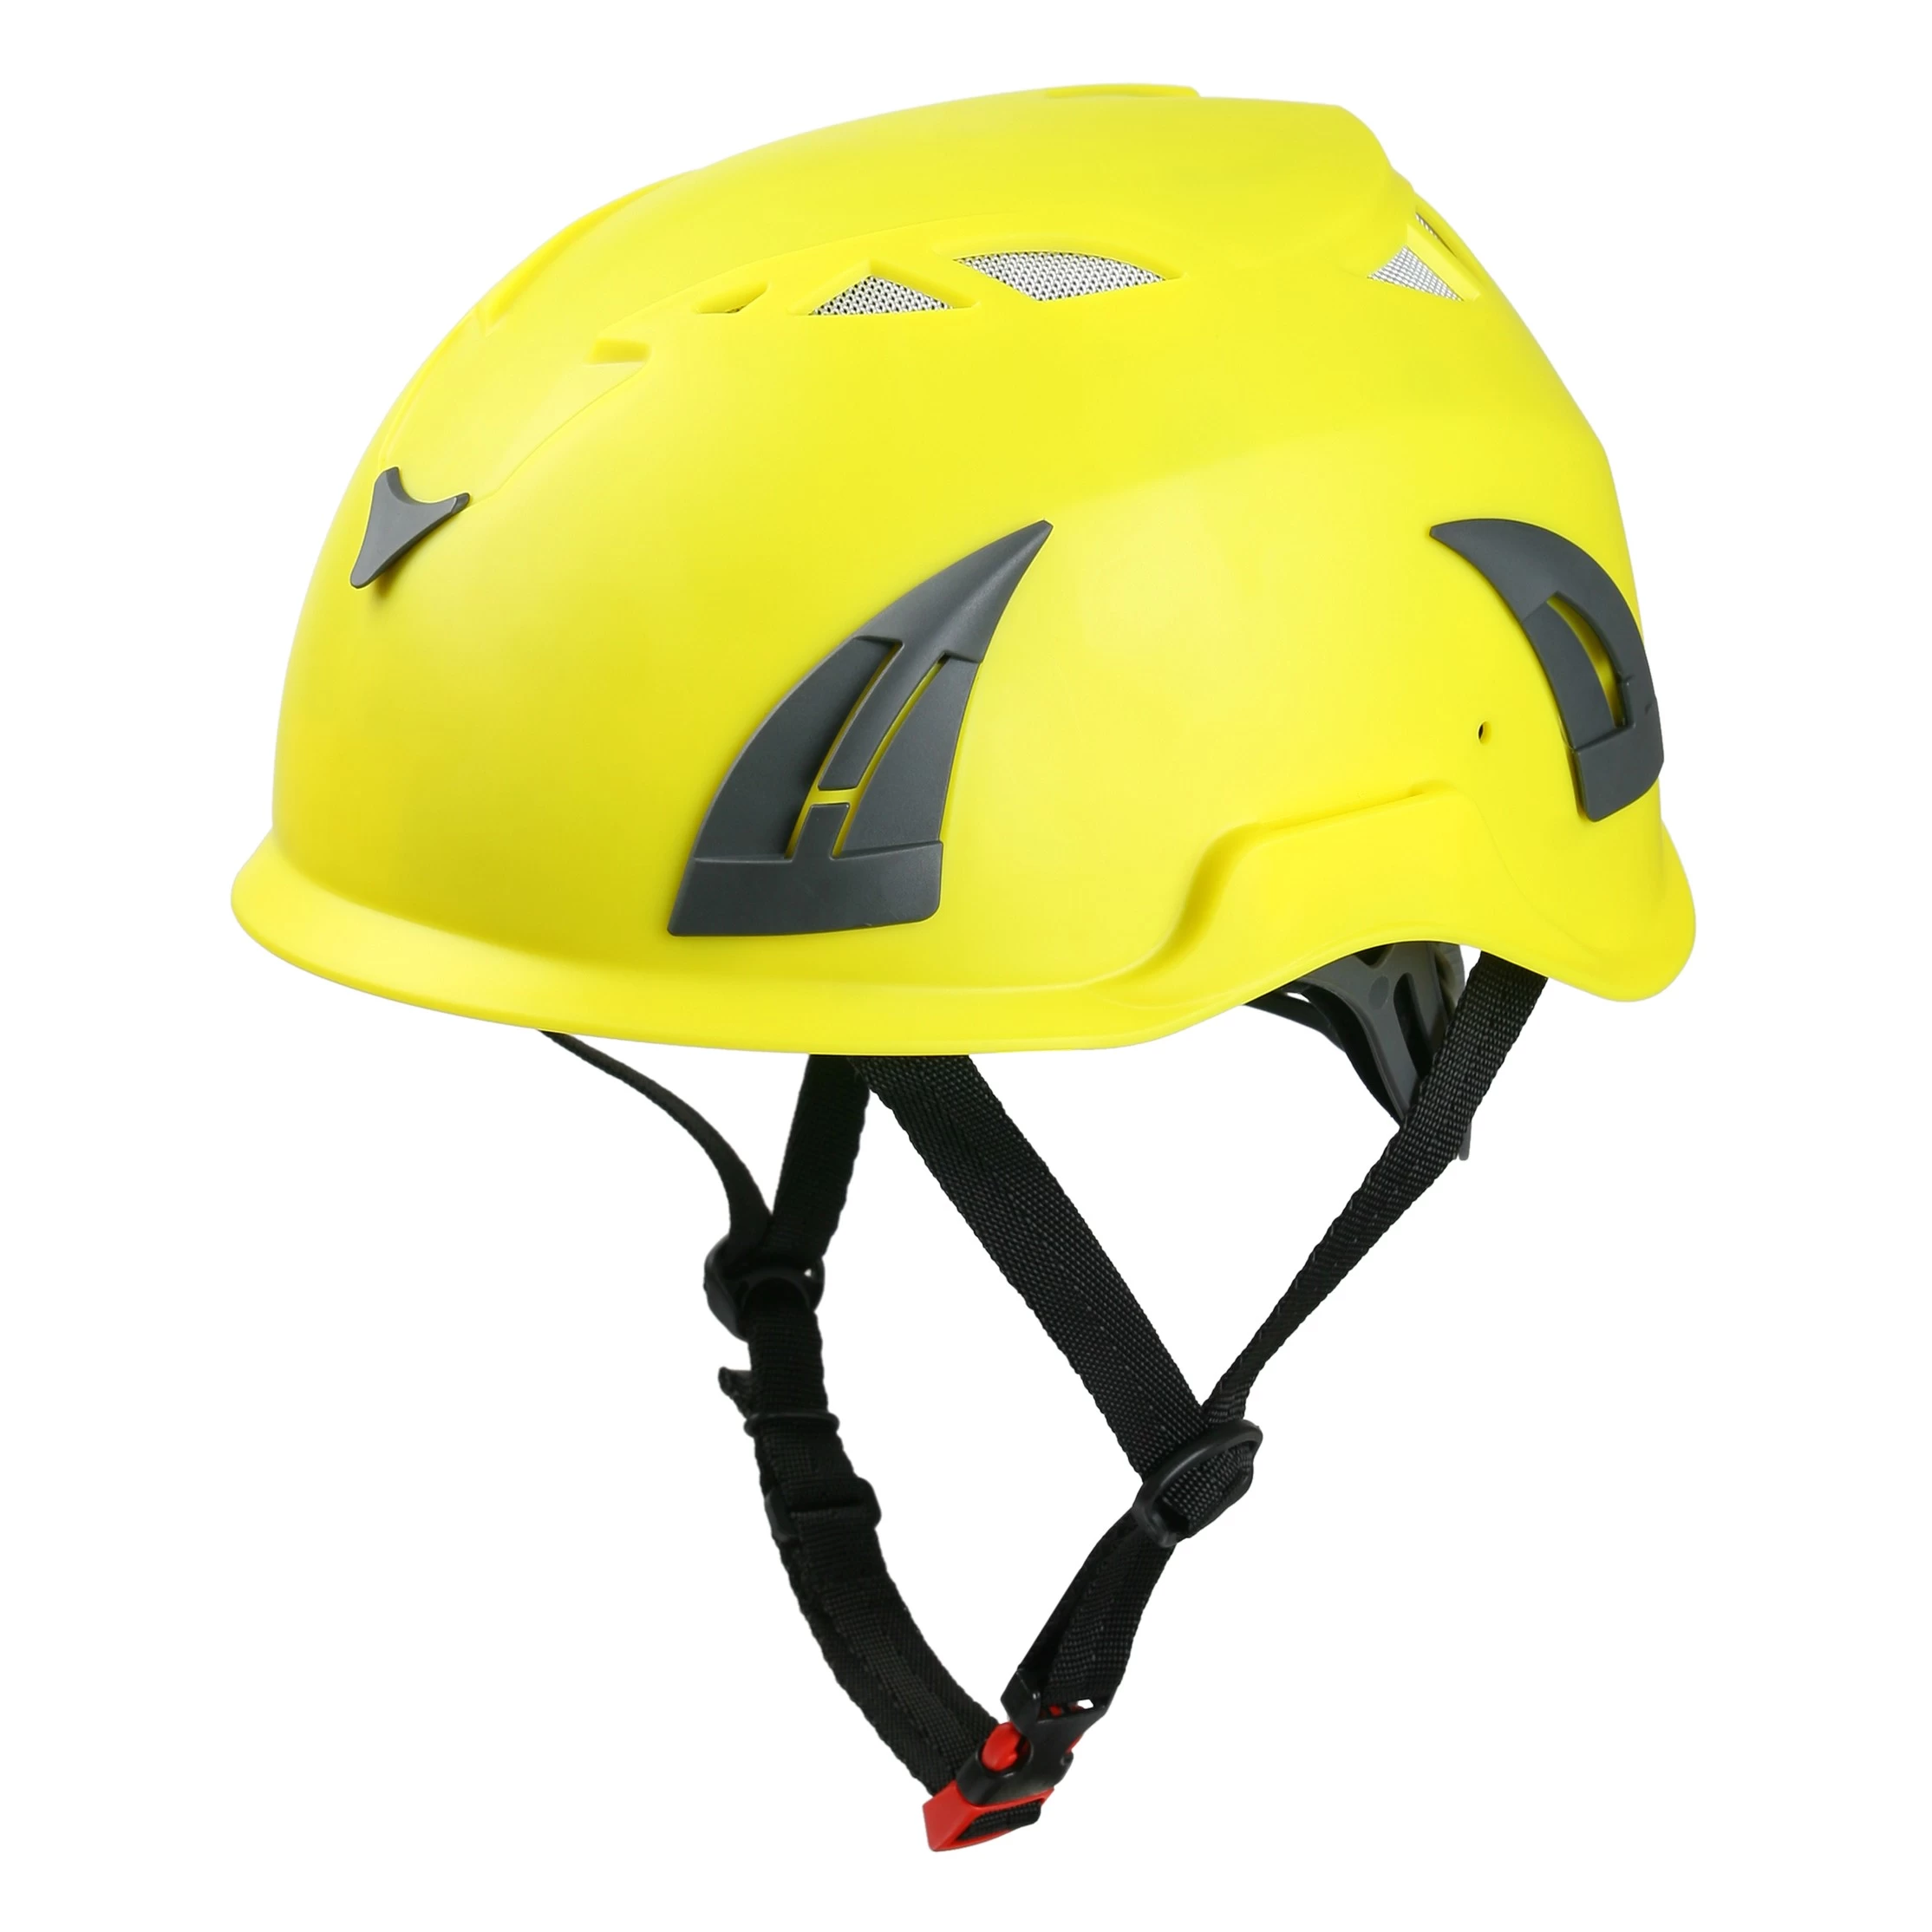 China Special Offer Newest Custom Rescue Safety Helmet, Best Mountaineering Helmet AU-M02 manufacturer